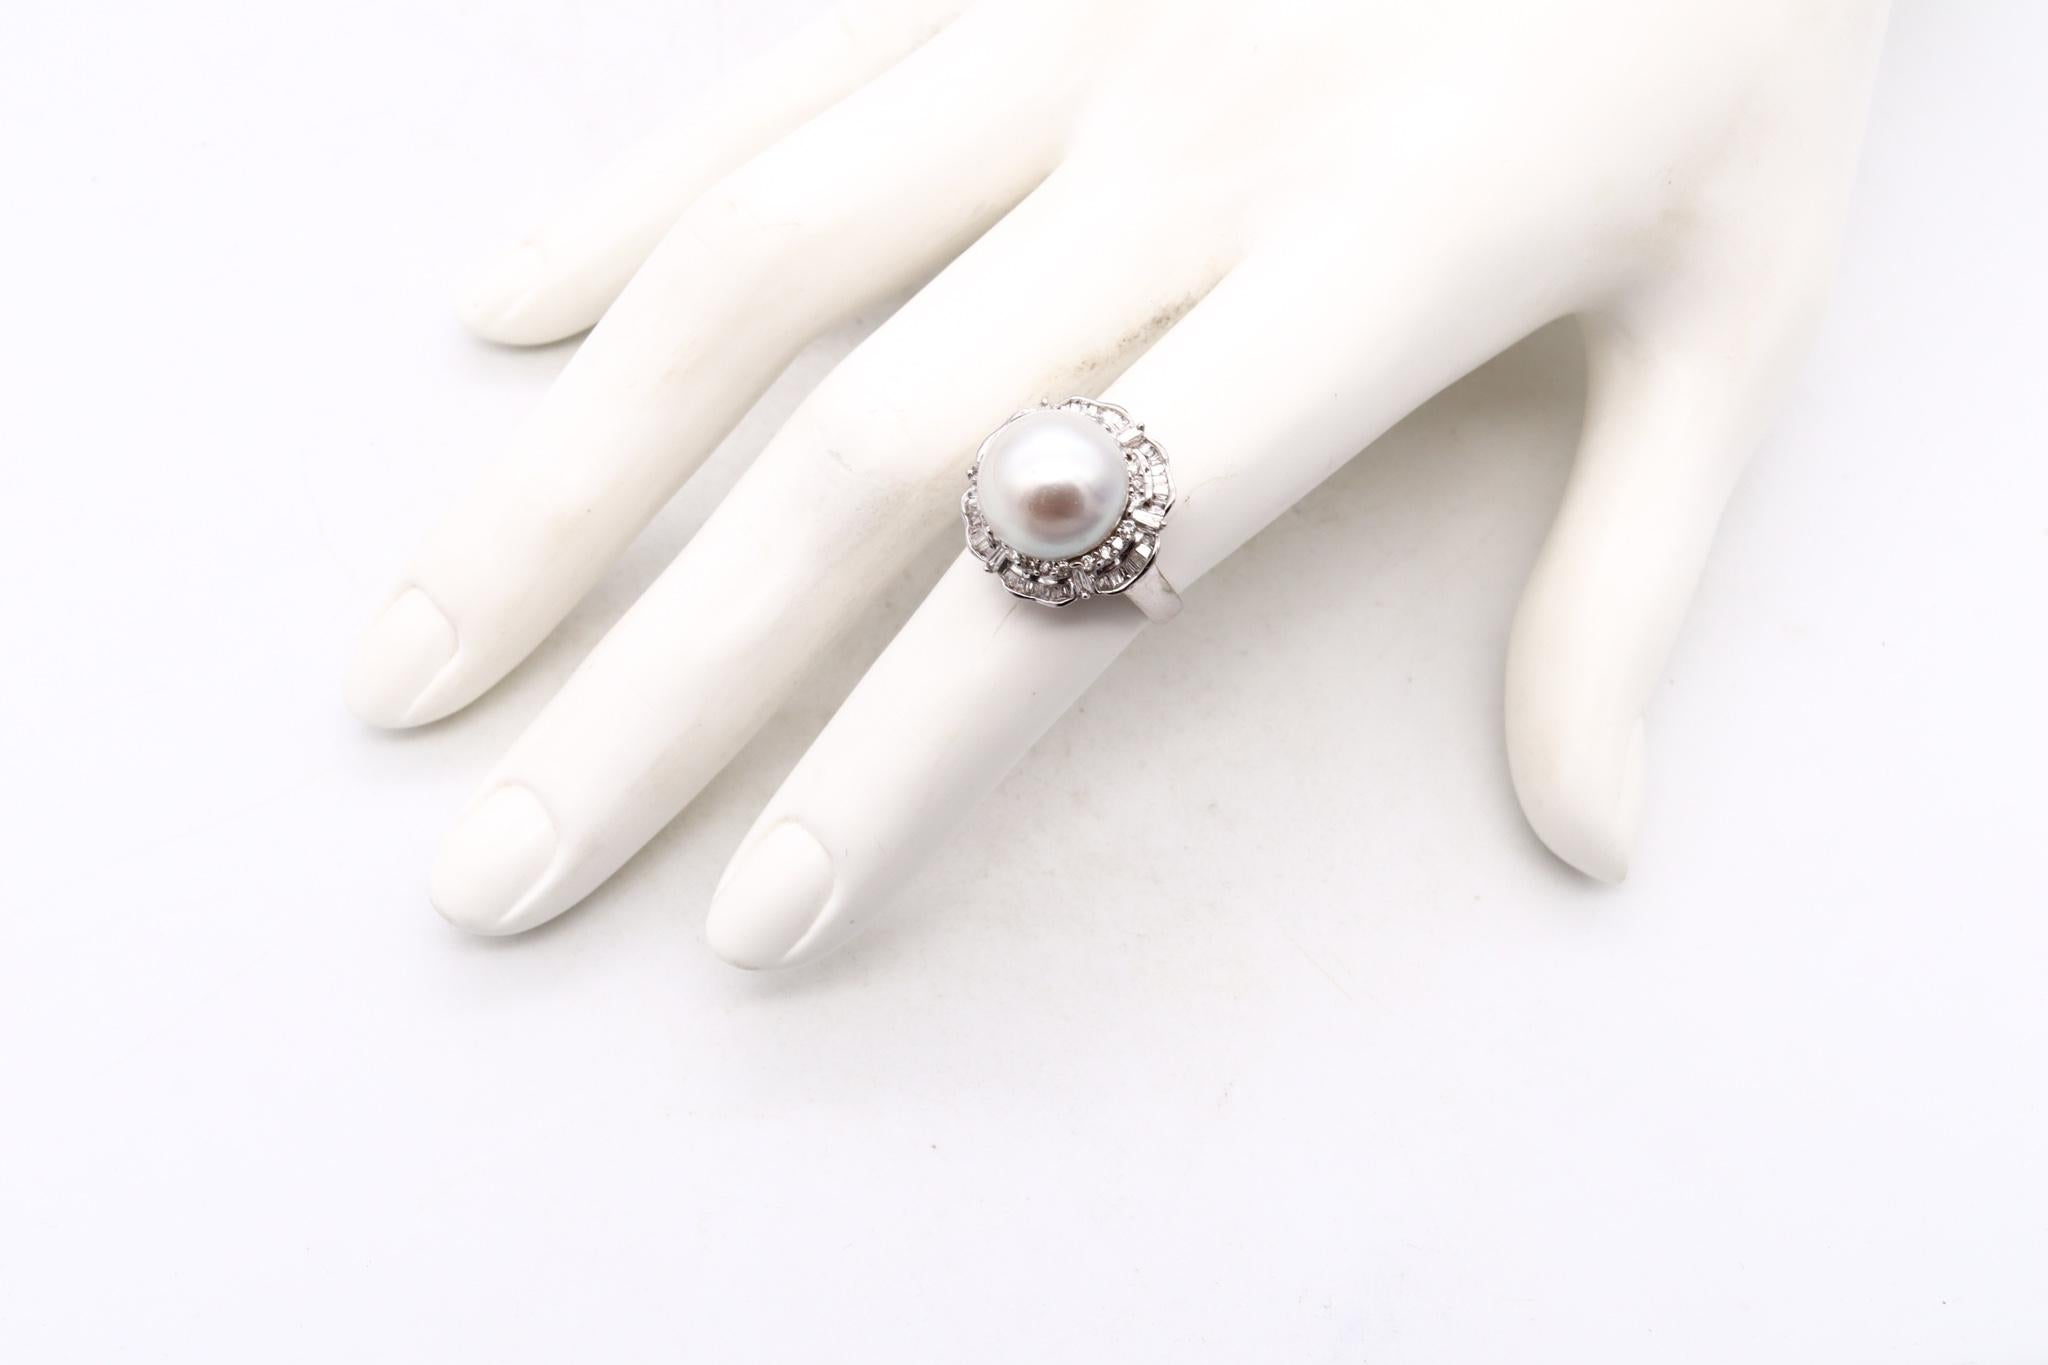 Jeweled cocktail ring with a Pearl.

A classic ballerina style piece, crafted in Italy in solid white gold of 18 karats. Mount in the center, with one cultured white pearl of 12 mm that is surrounded by natural white color-less diamonds, described